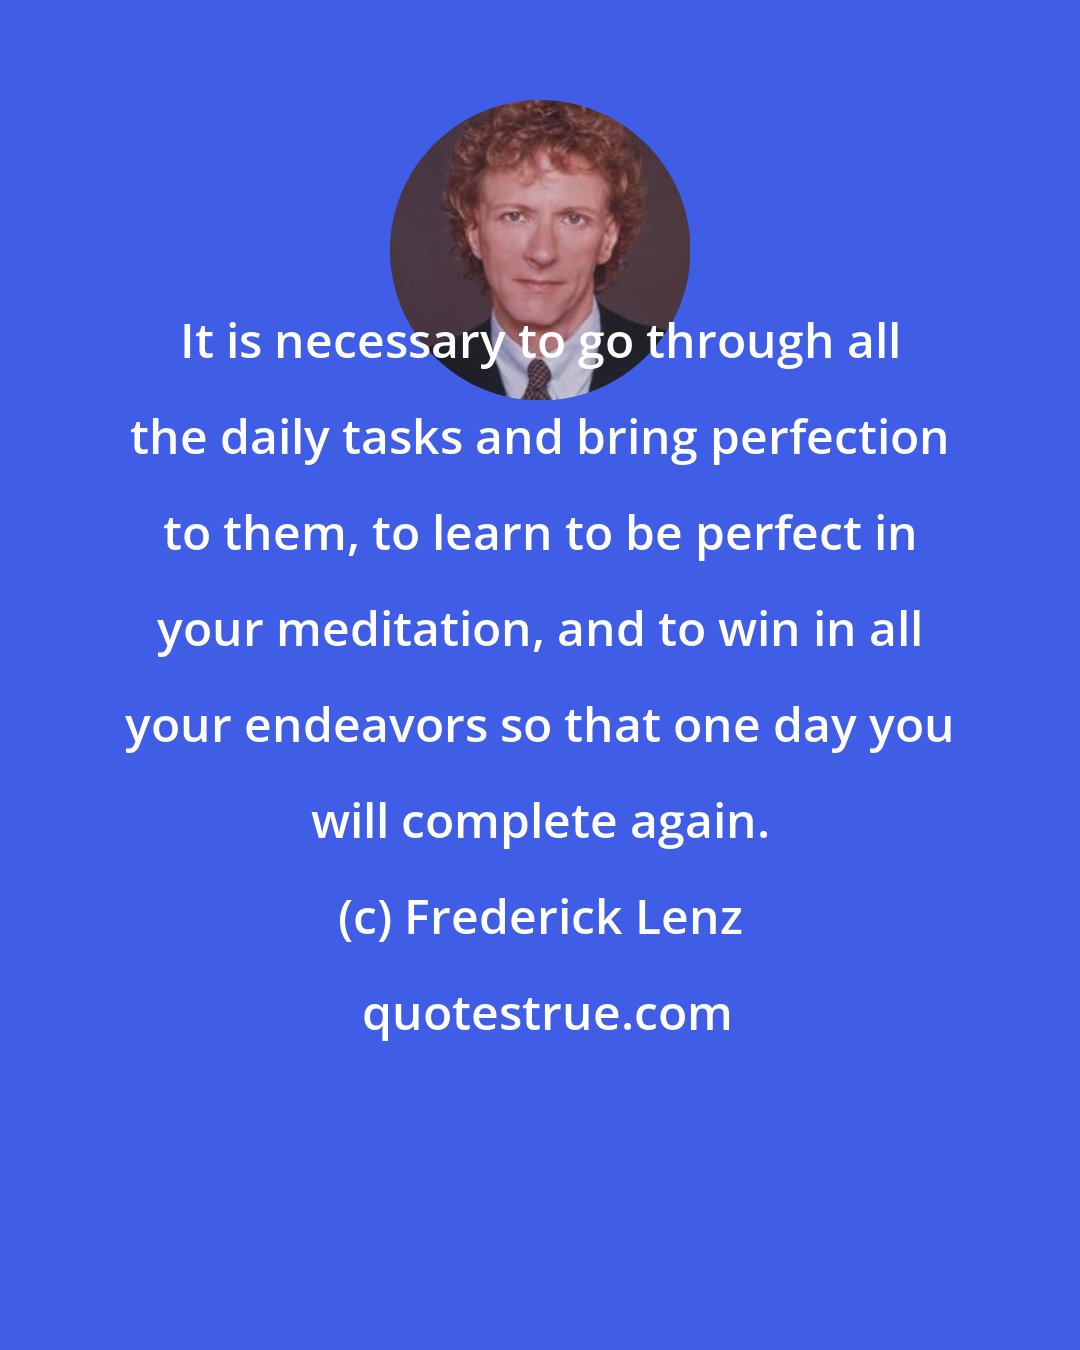 Frederick Lenz: It is necessary to go through all the daily tasks and bring perfection to them, to learn to be perfect in your meditation, and to win in all your endeavors so that one day you will complete again.